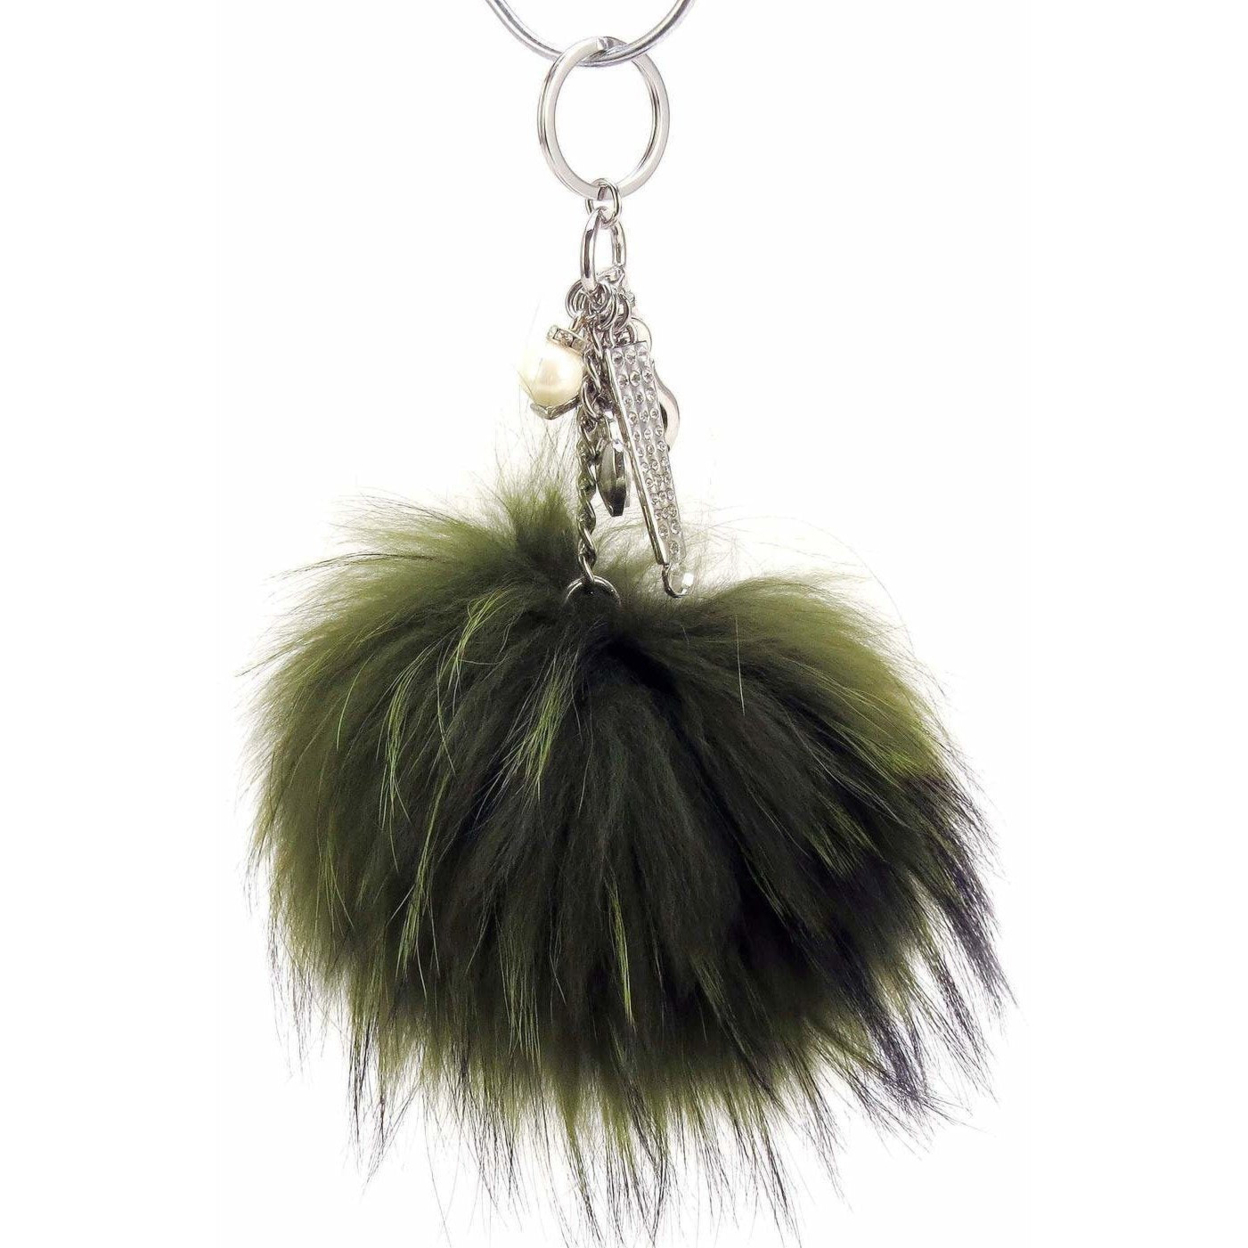 Real Fur Puff Ball Pom-Pom 6 Accessory Dangle Purse Charm - Olive Green With Silver Hardware